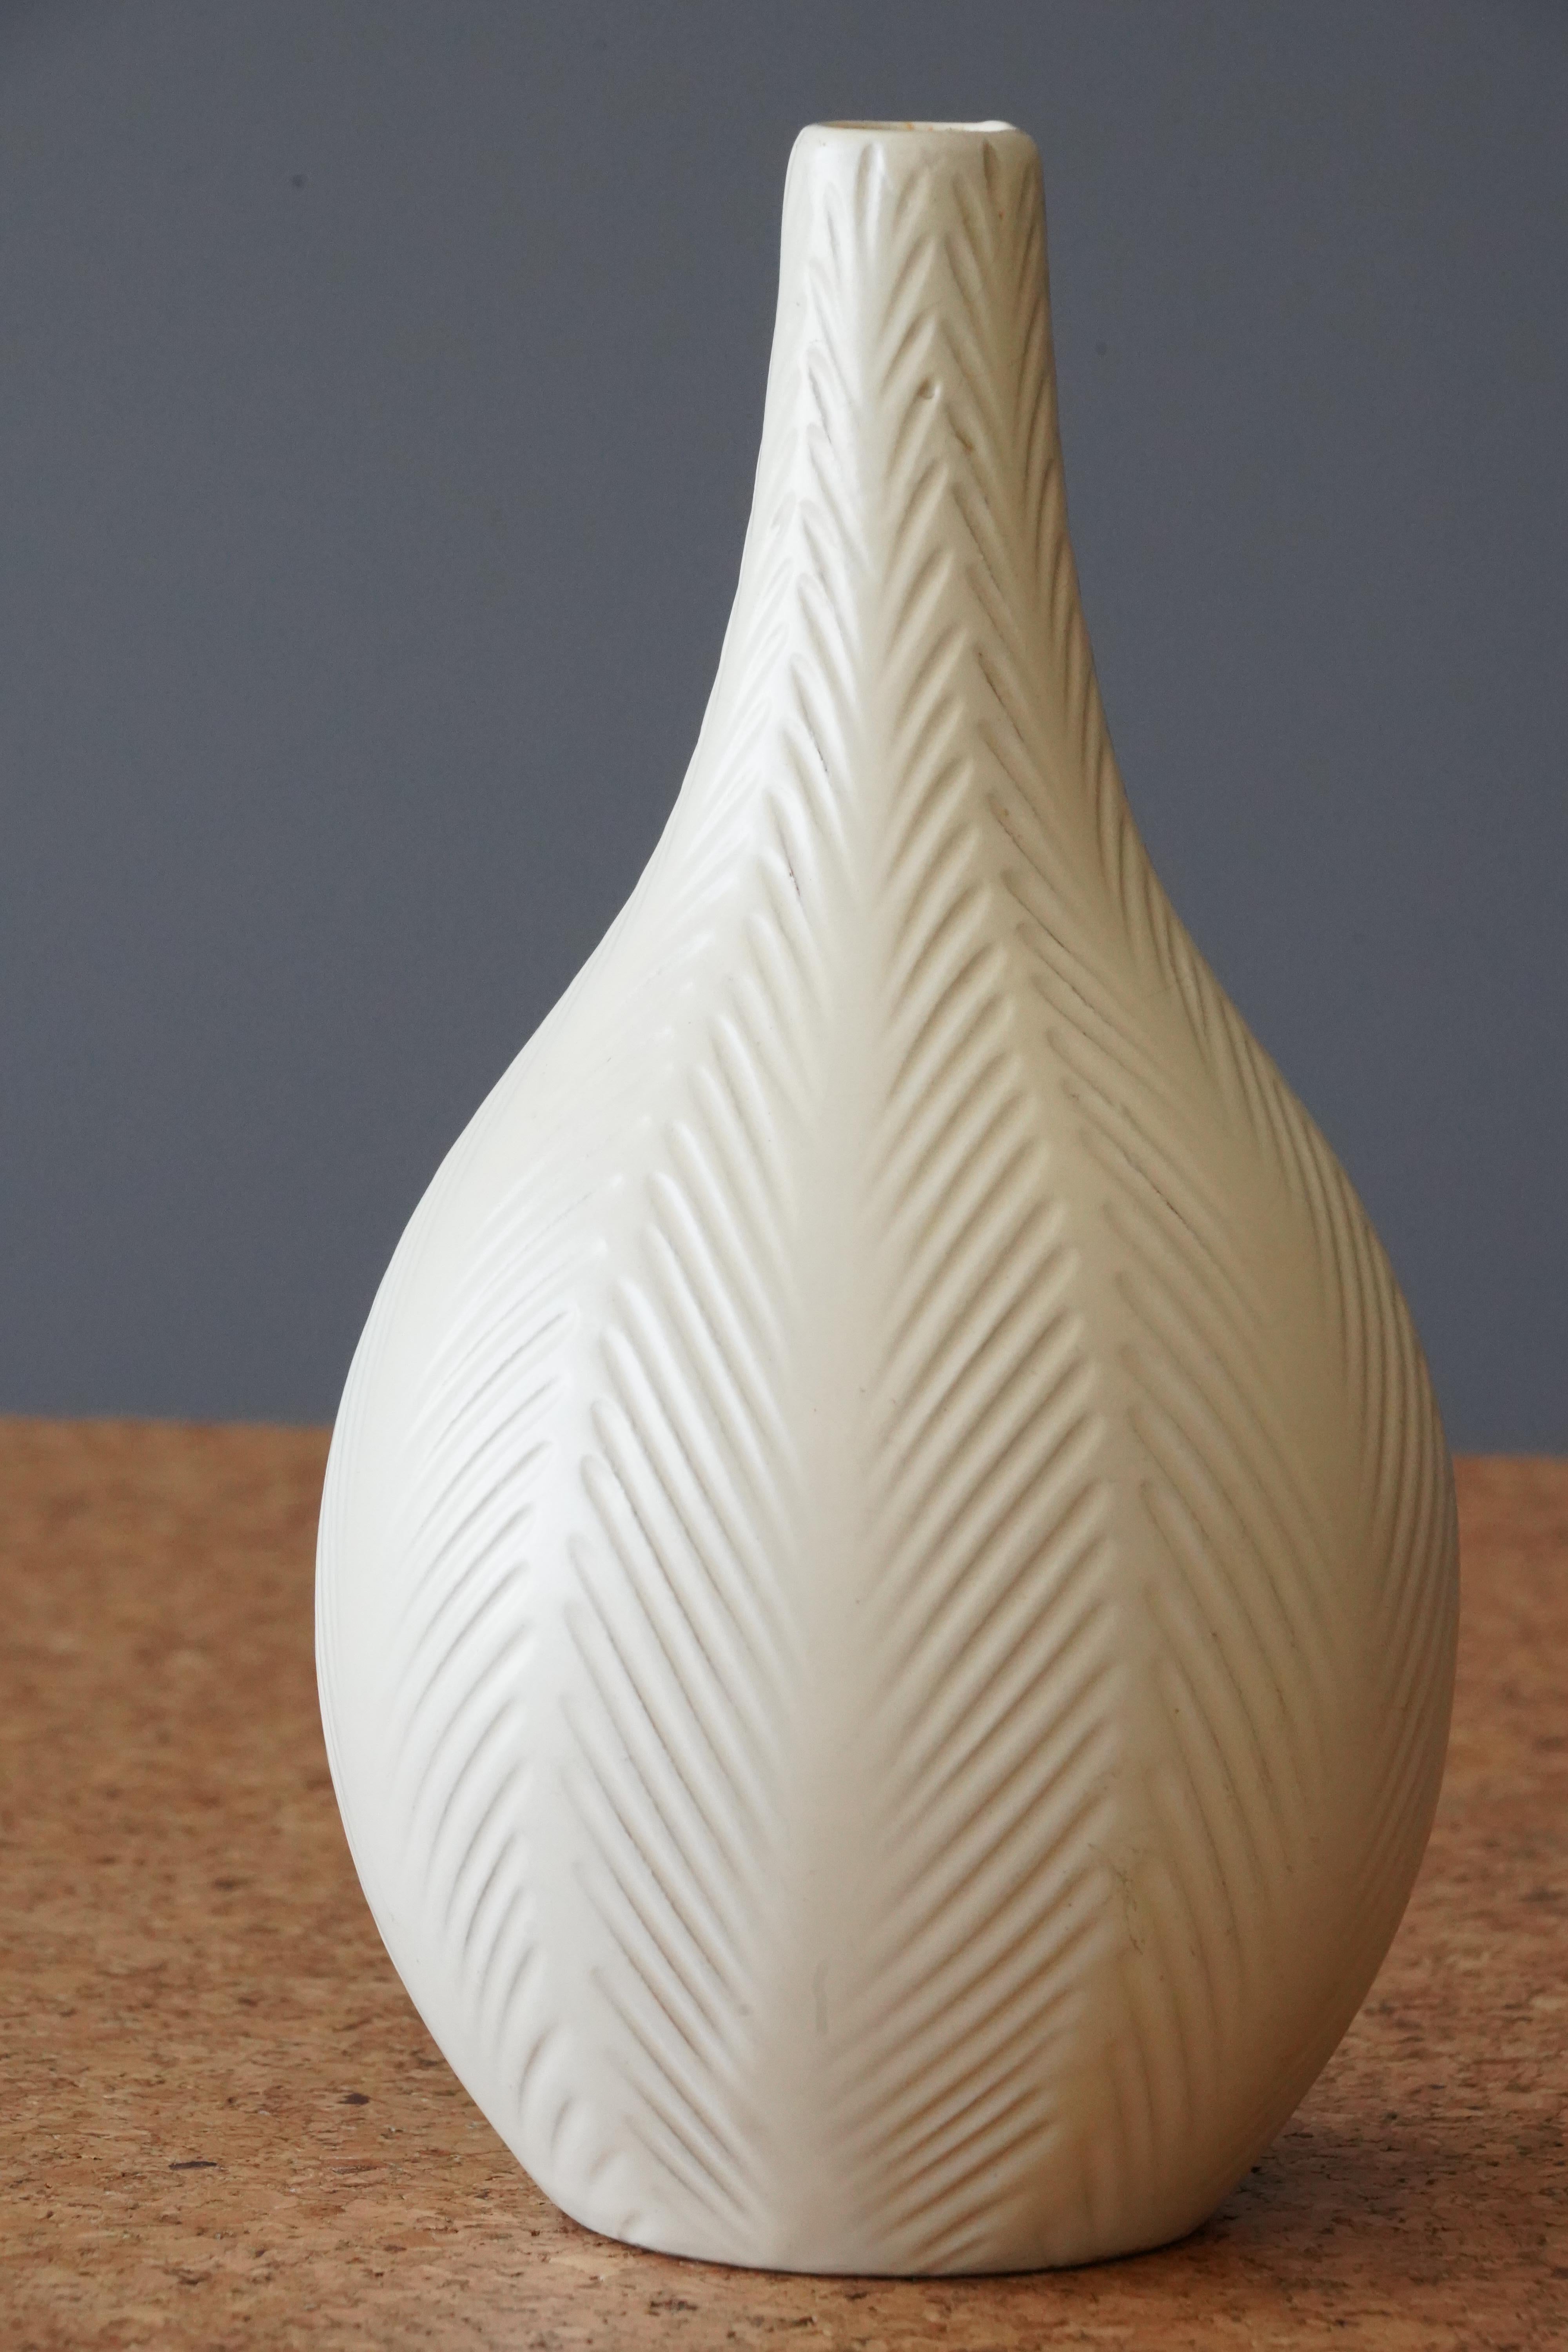 An early modernist vase. Produced by Upsala-Ekeby, Sweden, 1930s.

Other designers of the period include Ettore Sottsass, Carl Harry Stålhane, Lisa Larsson, Axel Salto, and Arne Bang.